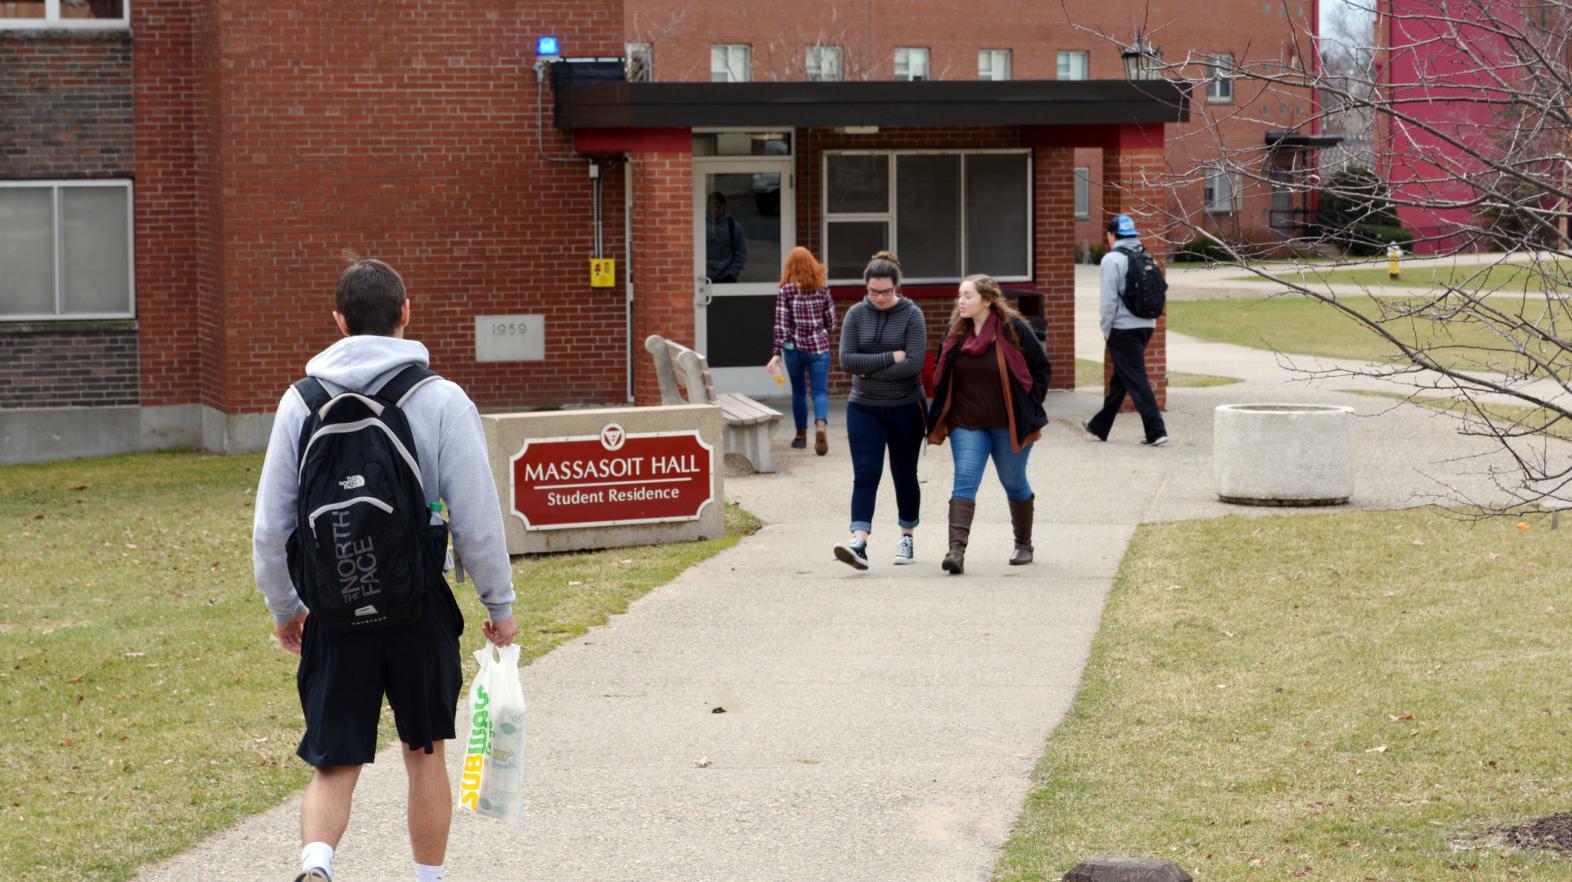 The front of Massasoit Hall with students walking into the building.